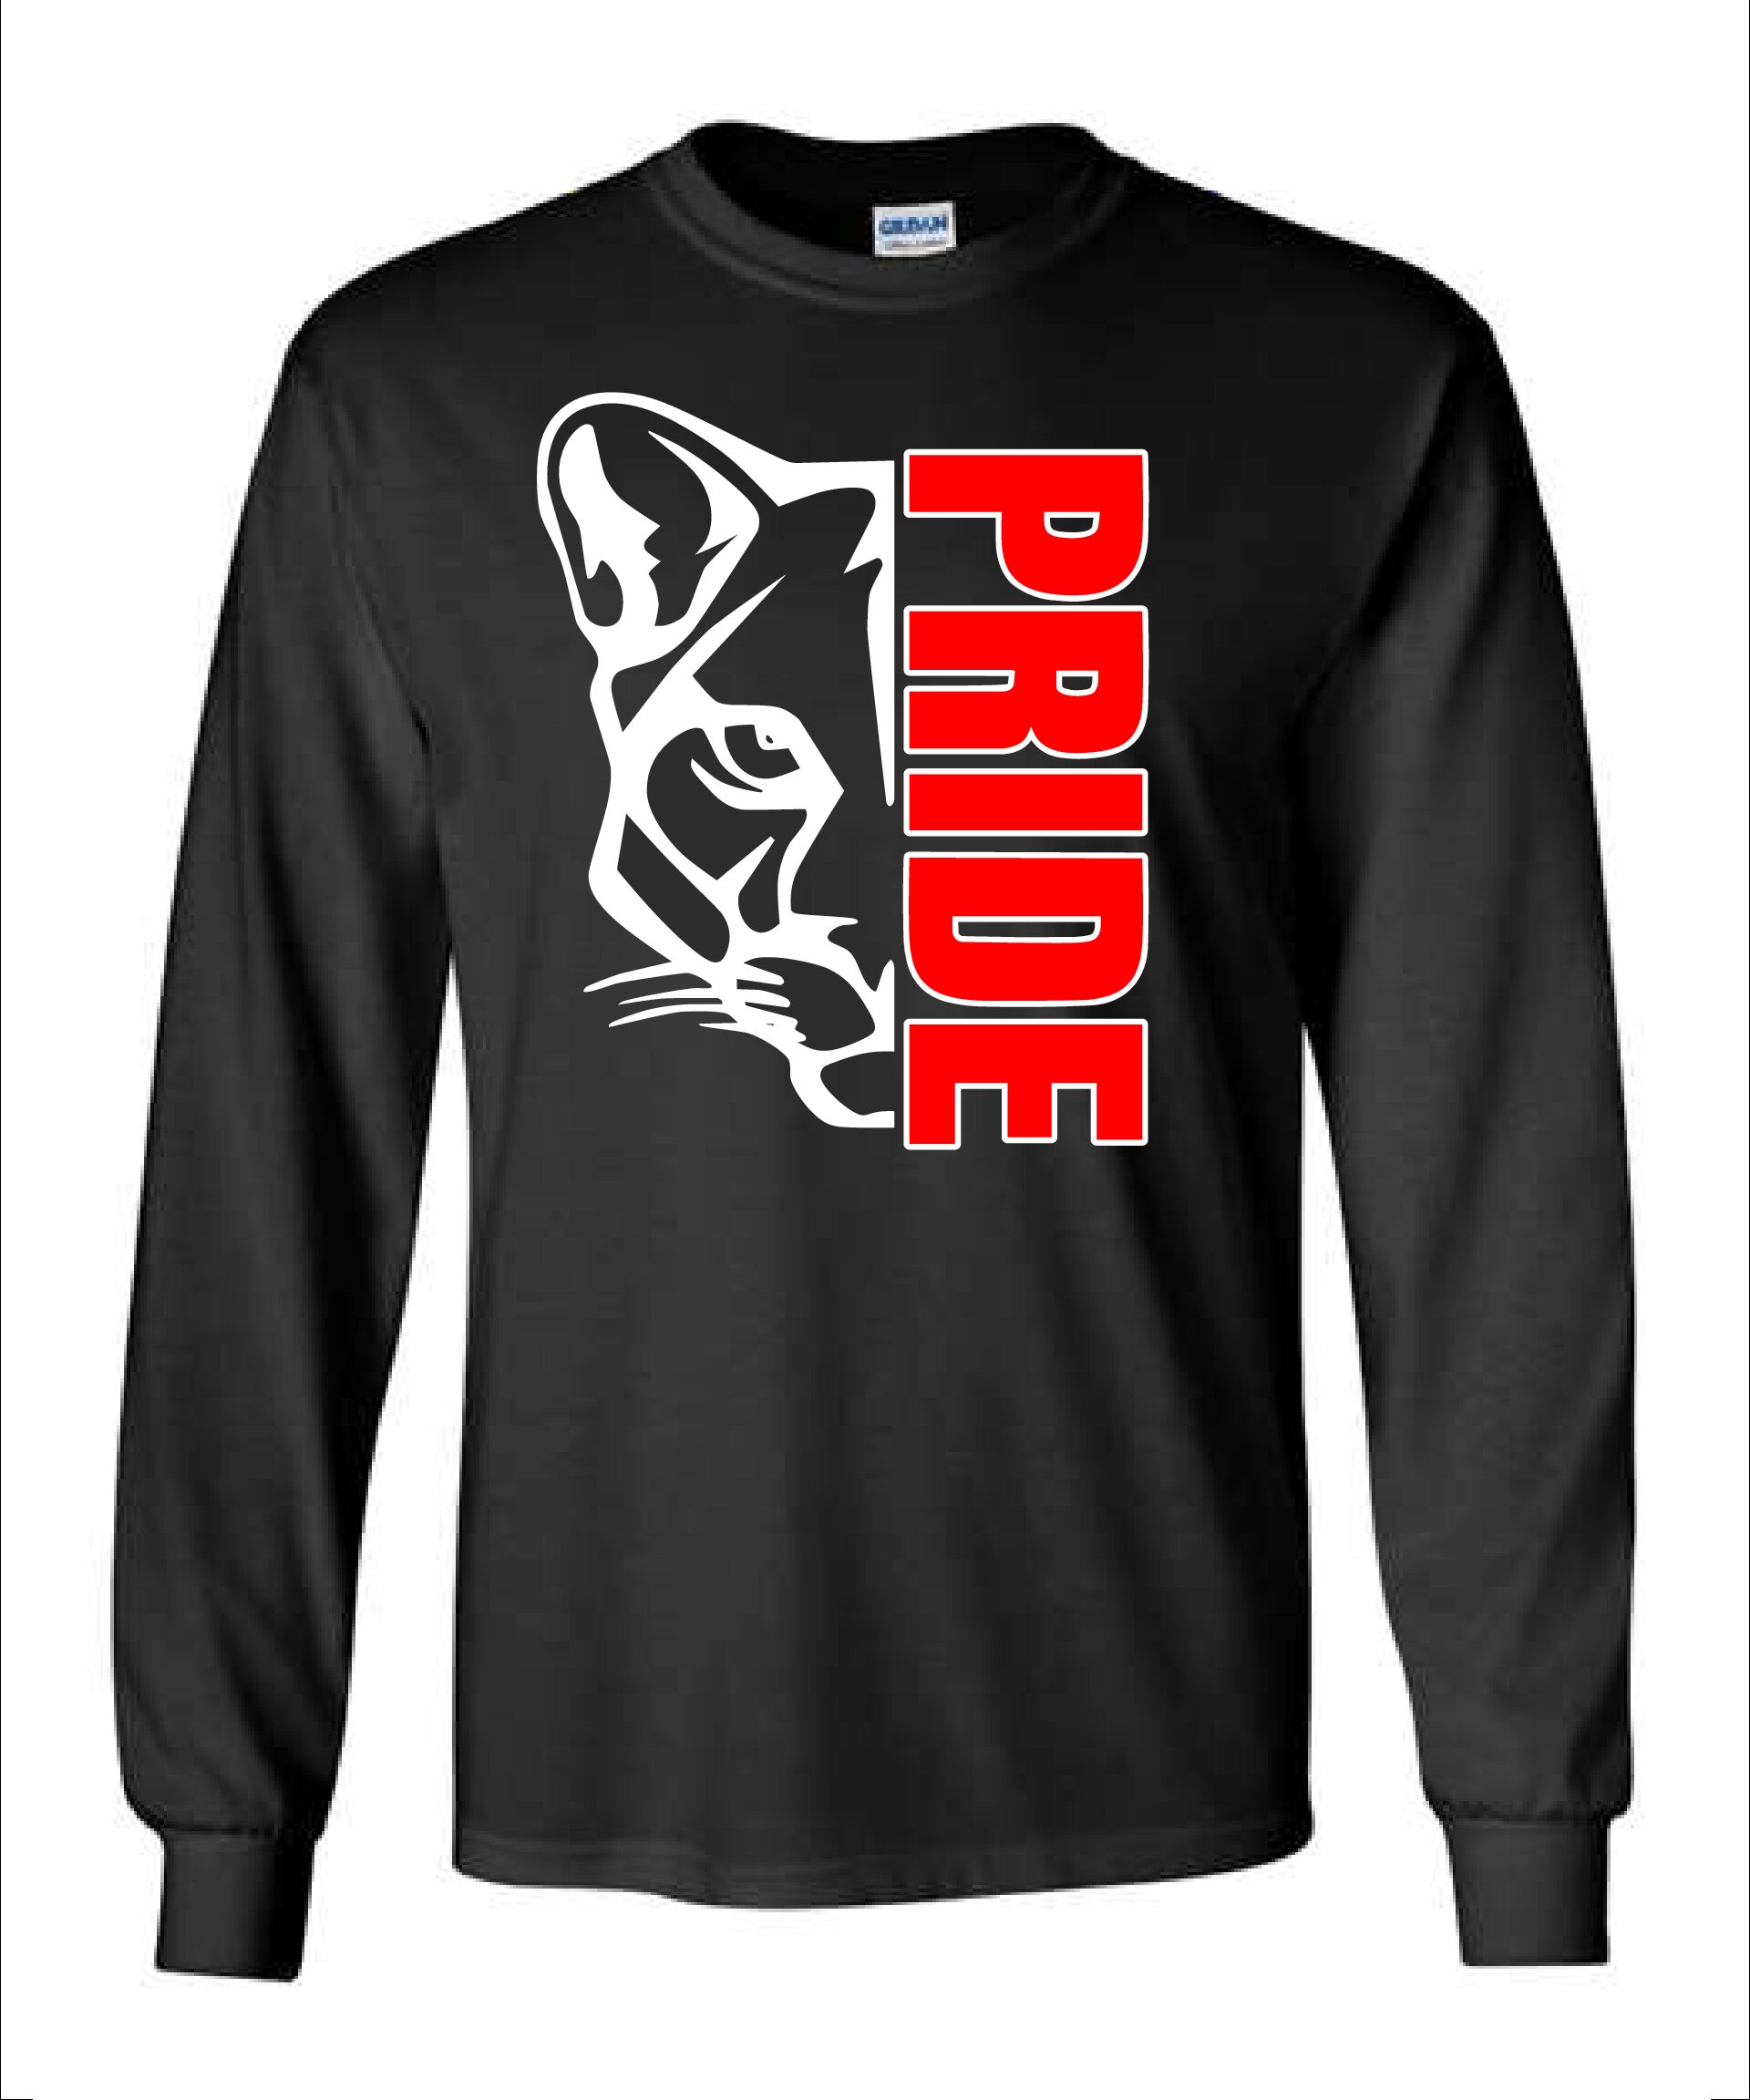 Cougar Pride Long Sleeve Tee (Adult and Youth Sizes)